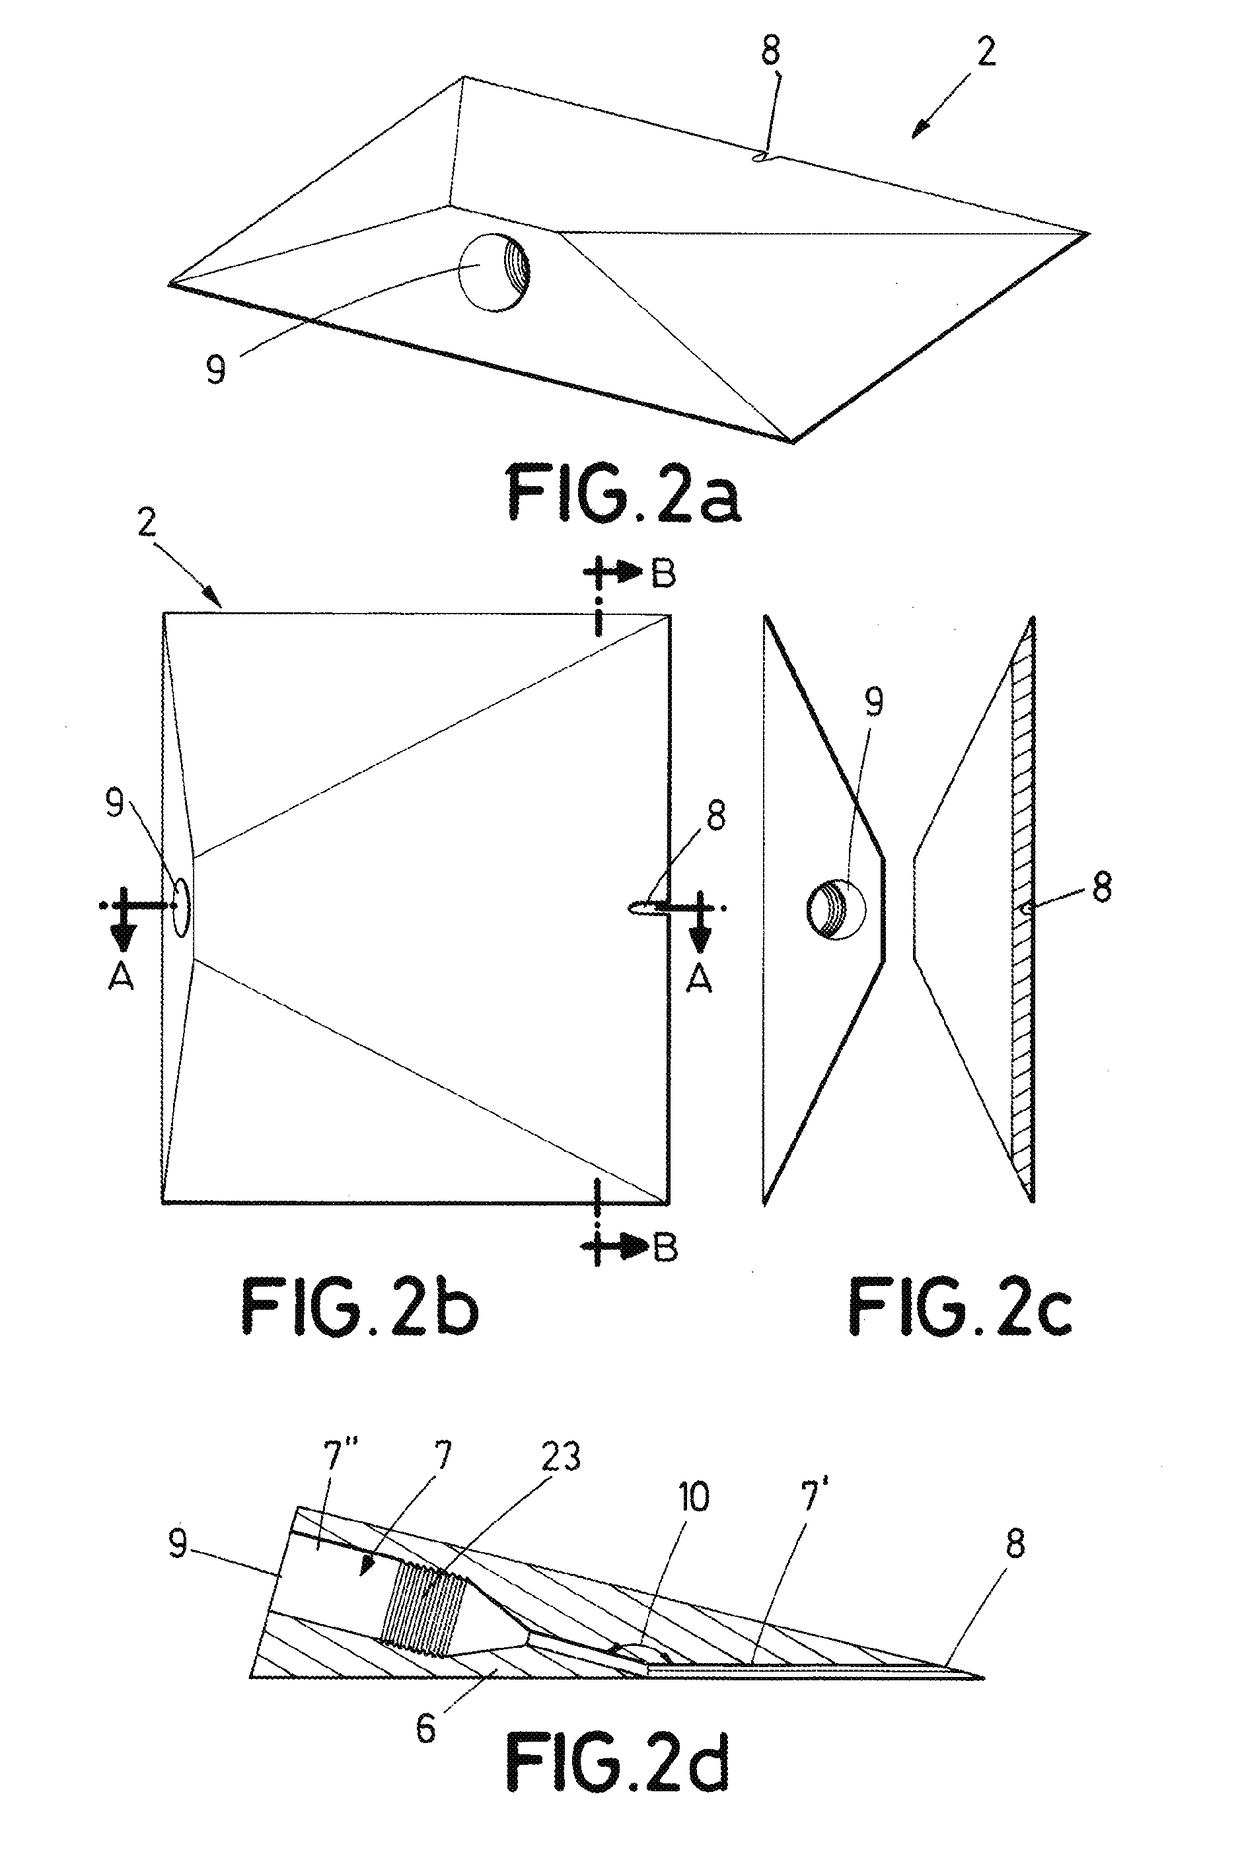 Optical fiber connection device for a composite structure, composite structure for an aircraft, and manufacturing method thereof